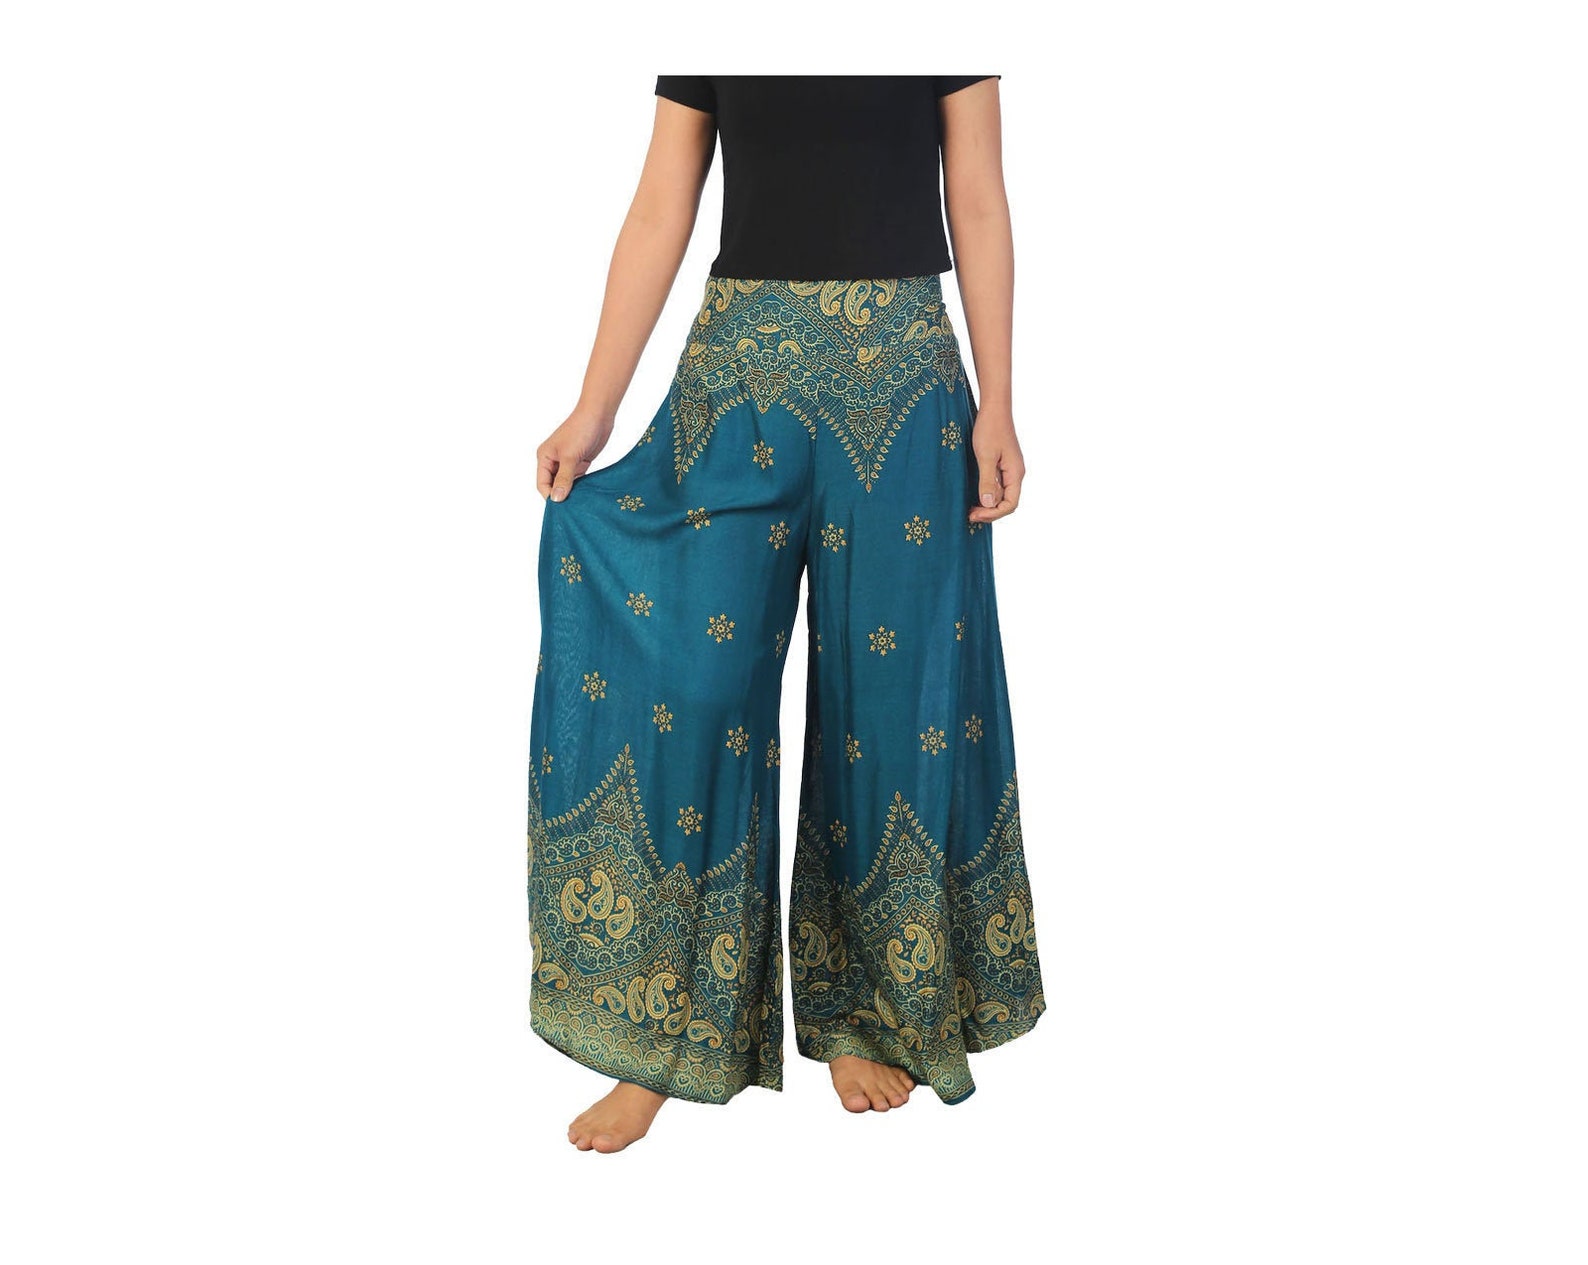 WOMENS TEAL PALAZZO Pants Small to Plus Size Wide Leg Yoga - Etsy